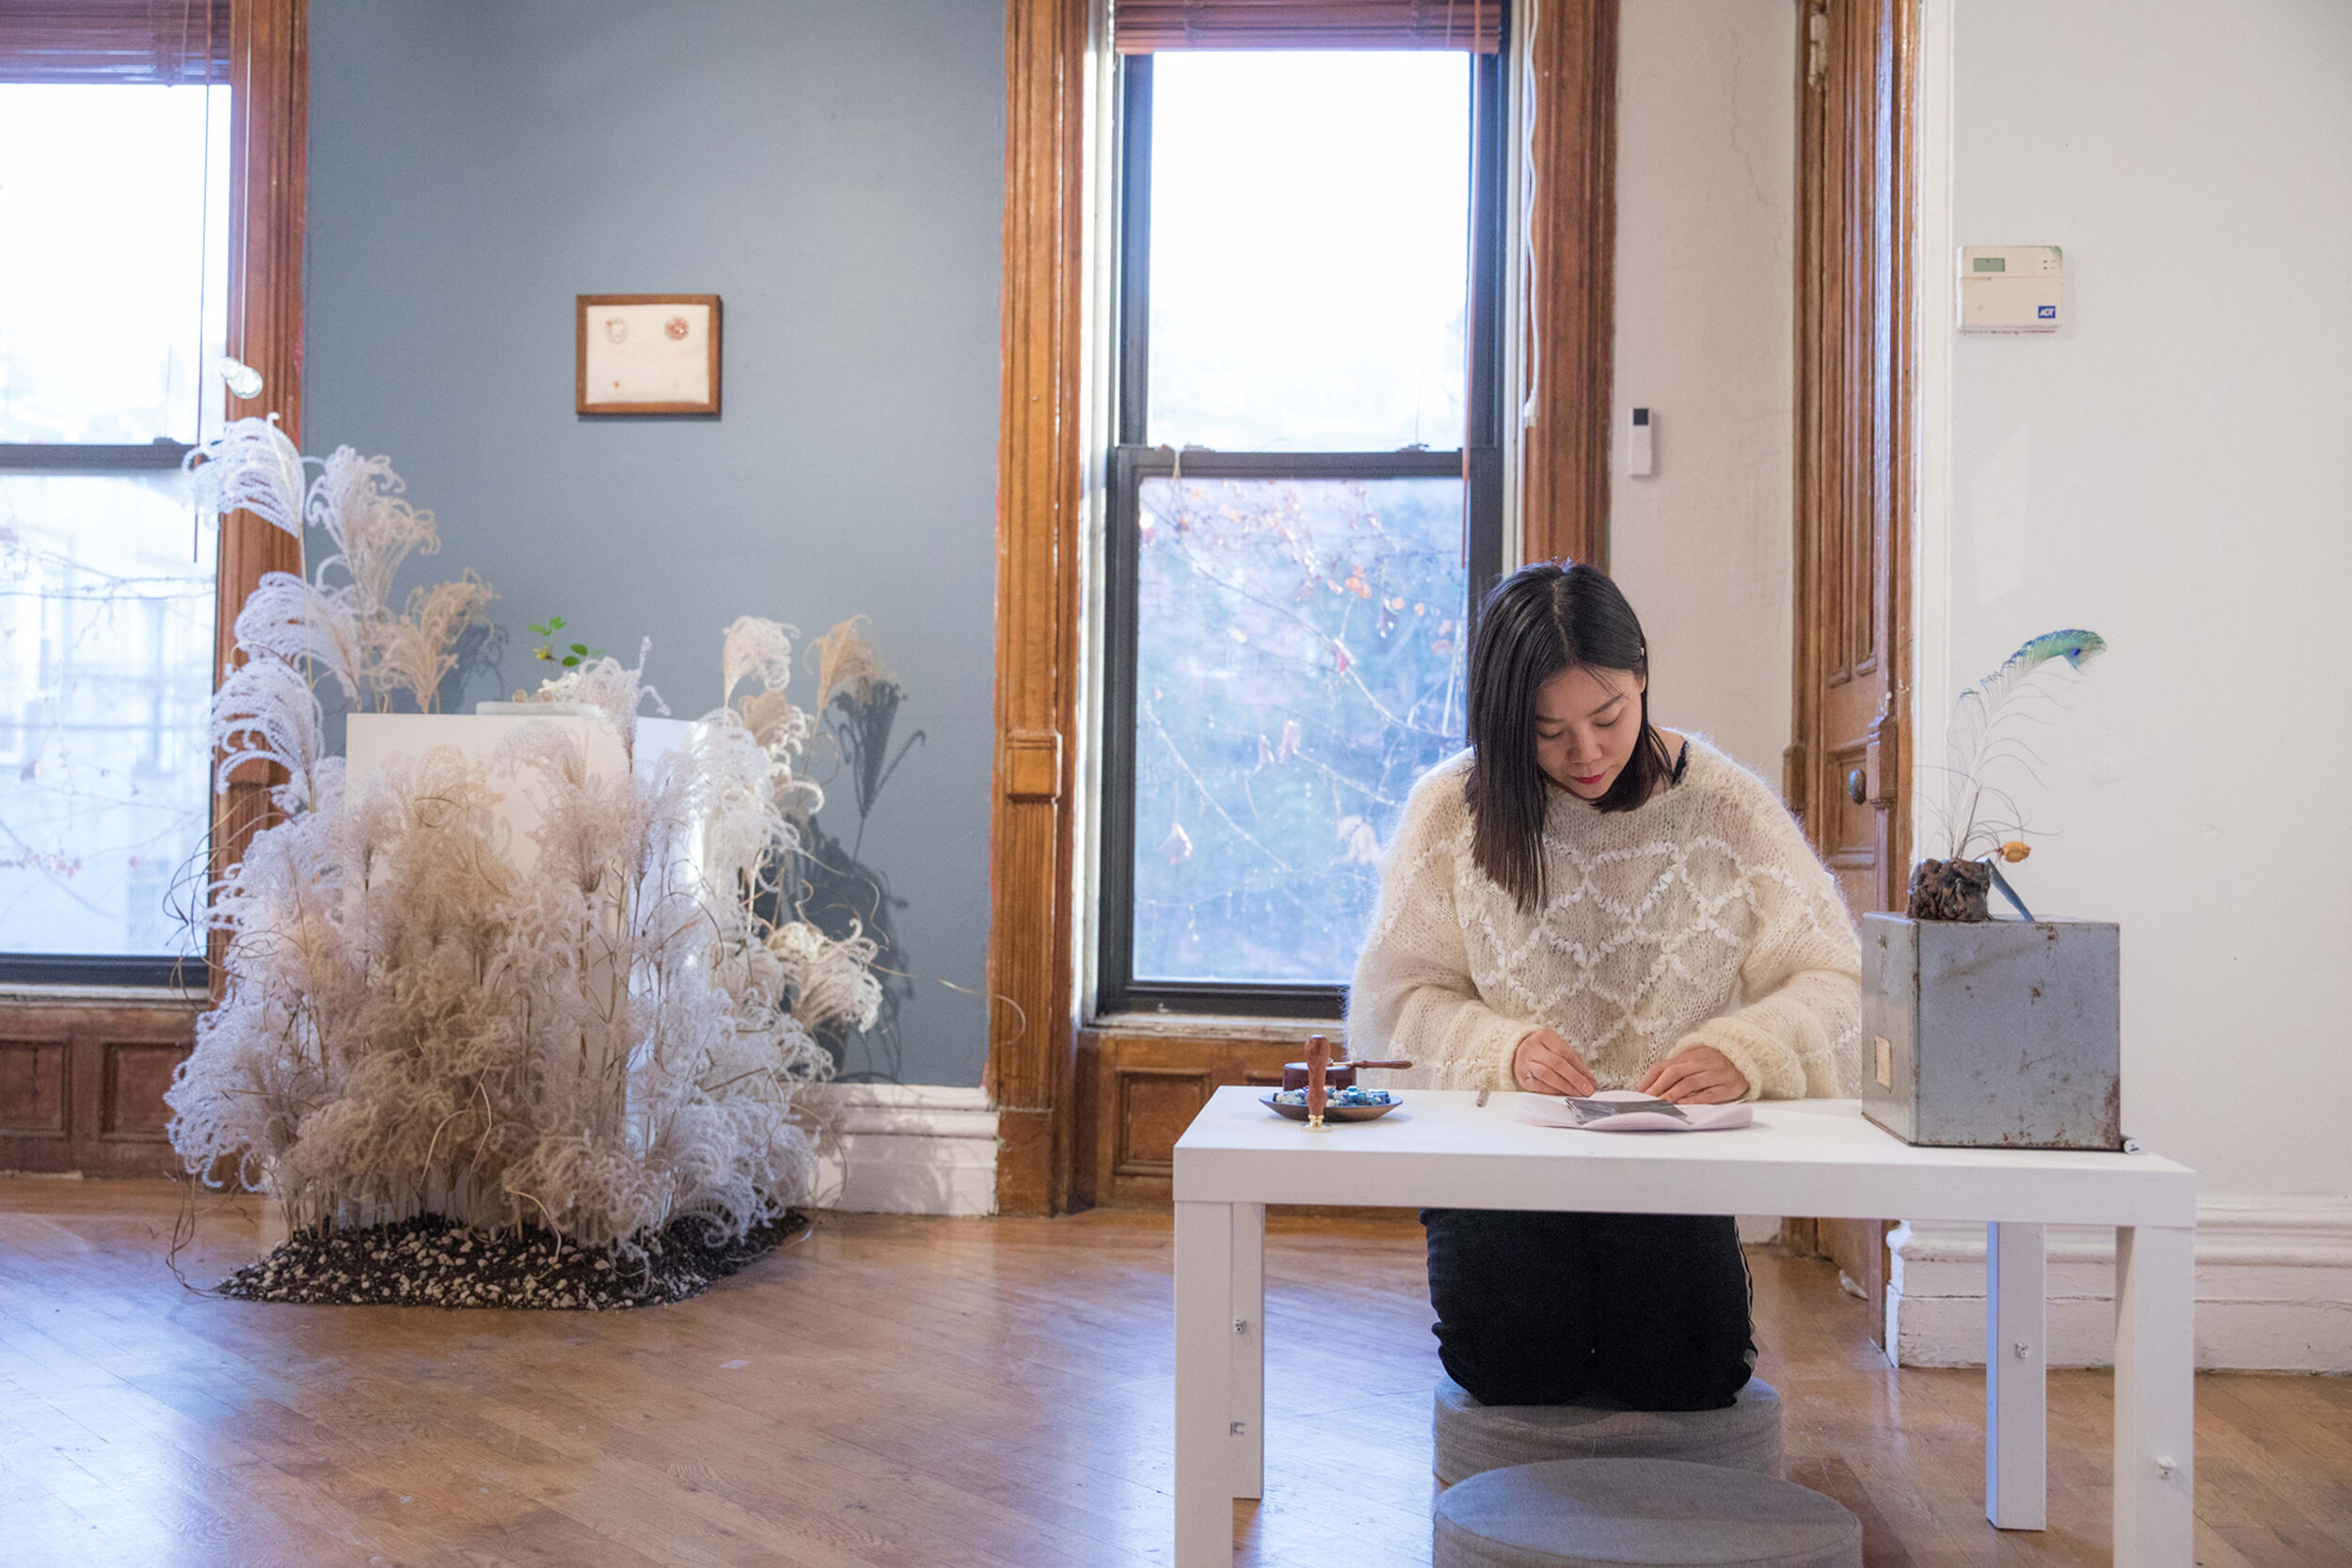   Meng Du: Embers  opening, visitor writing a letter to self or others in the past or future. Photograph by Nadia Peichao Lin. ©Meng Du, courtesy Fou Gallery. 